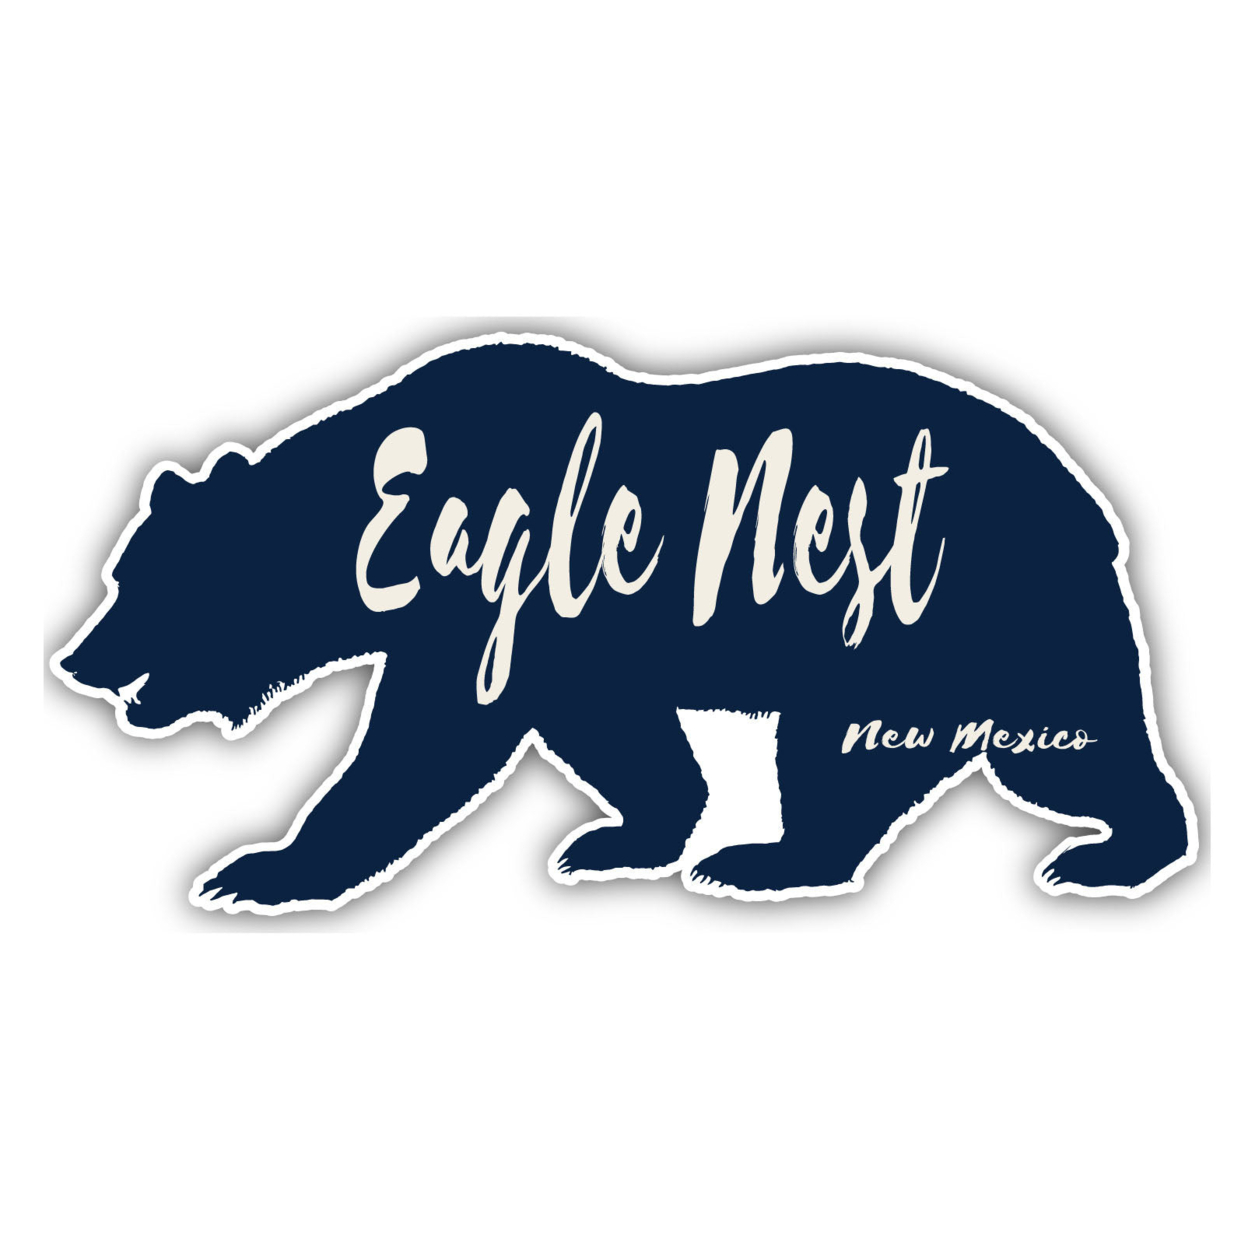 Eagle Nest New Mexico Souvenir Decorative Stickers (Choose Theme And Size) - 4-Pack, 8-Inch, Great Outdoors